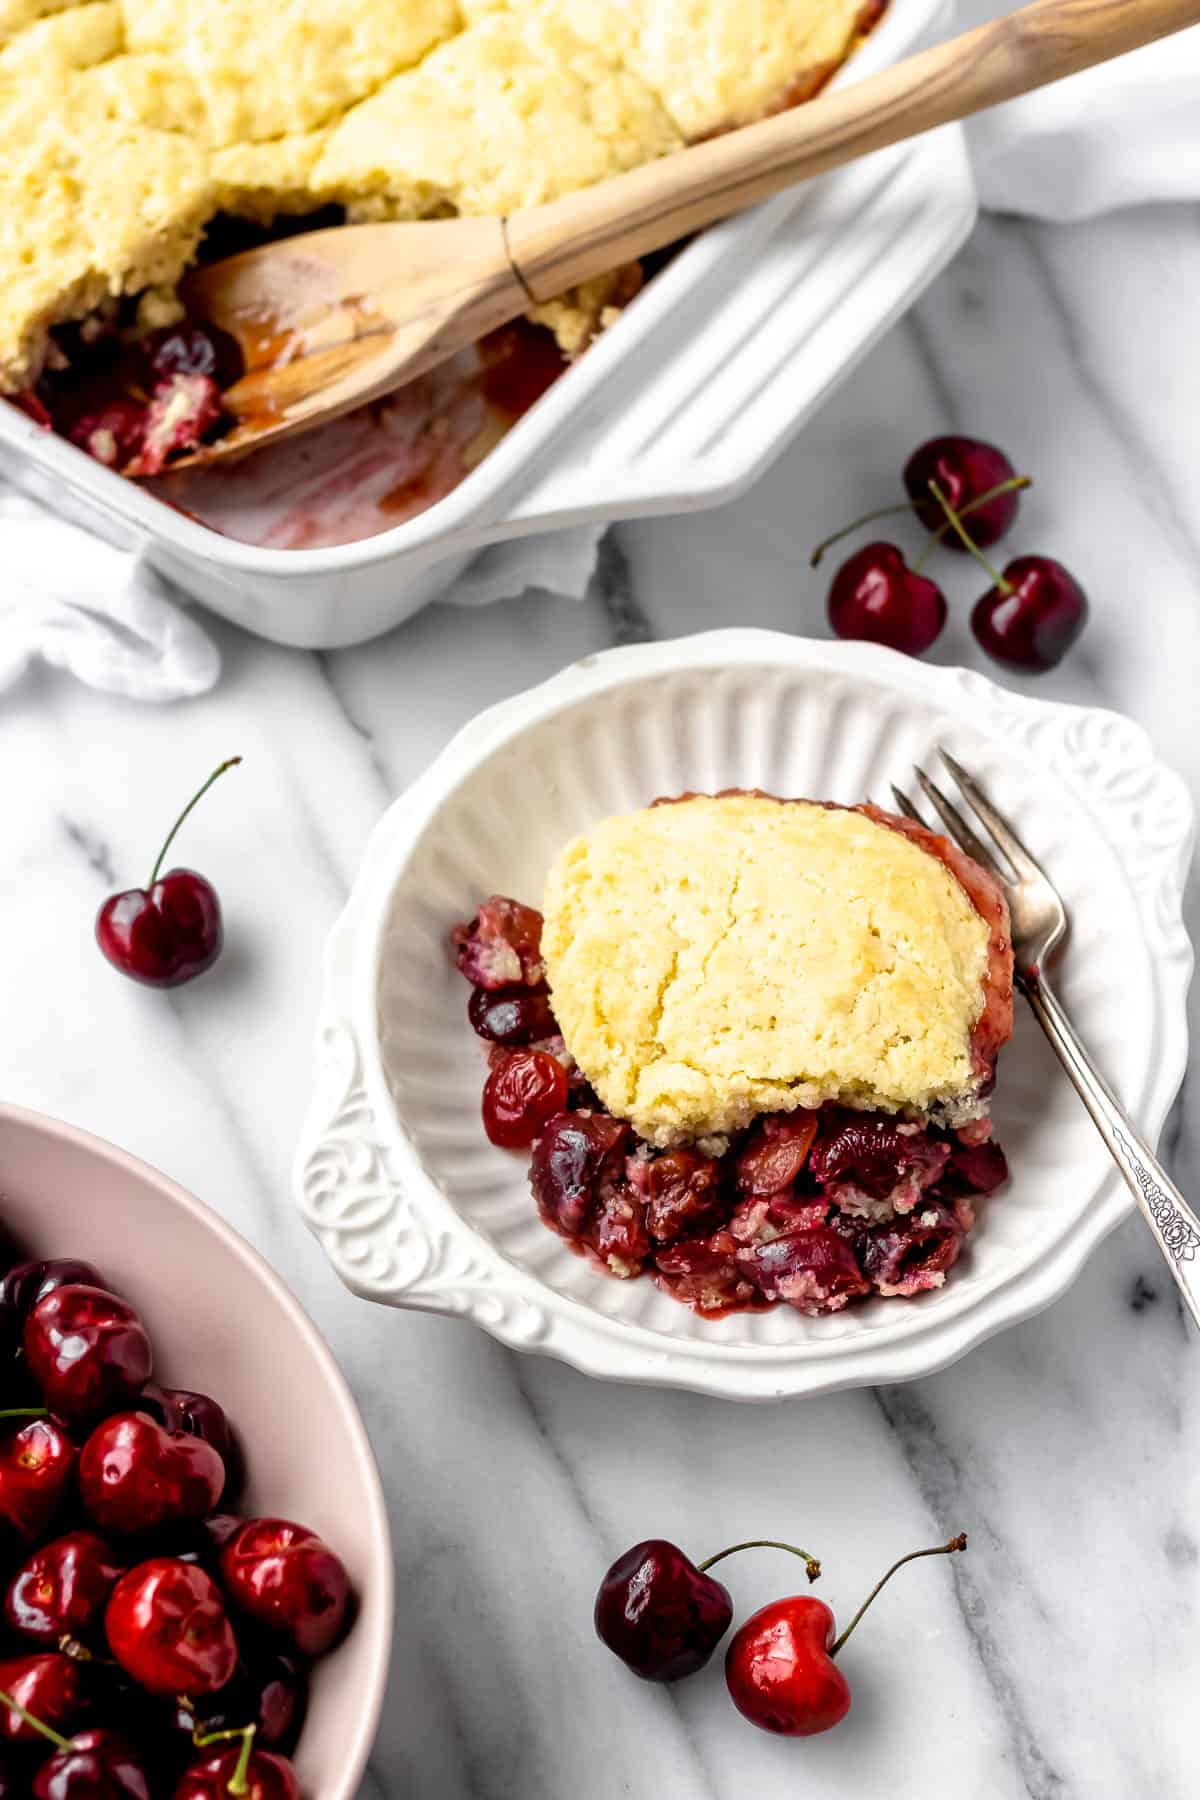 A serving of cherry cobbler in a white bowl with a bowl of cherries partially showing in the front, a baking dish of cobbler in the background and several cherries scattered around